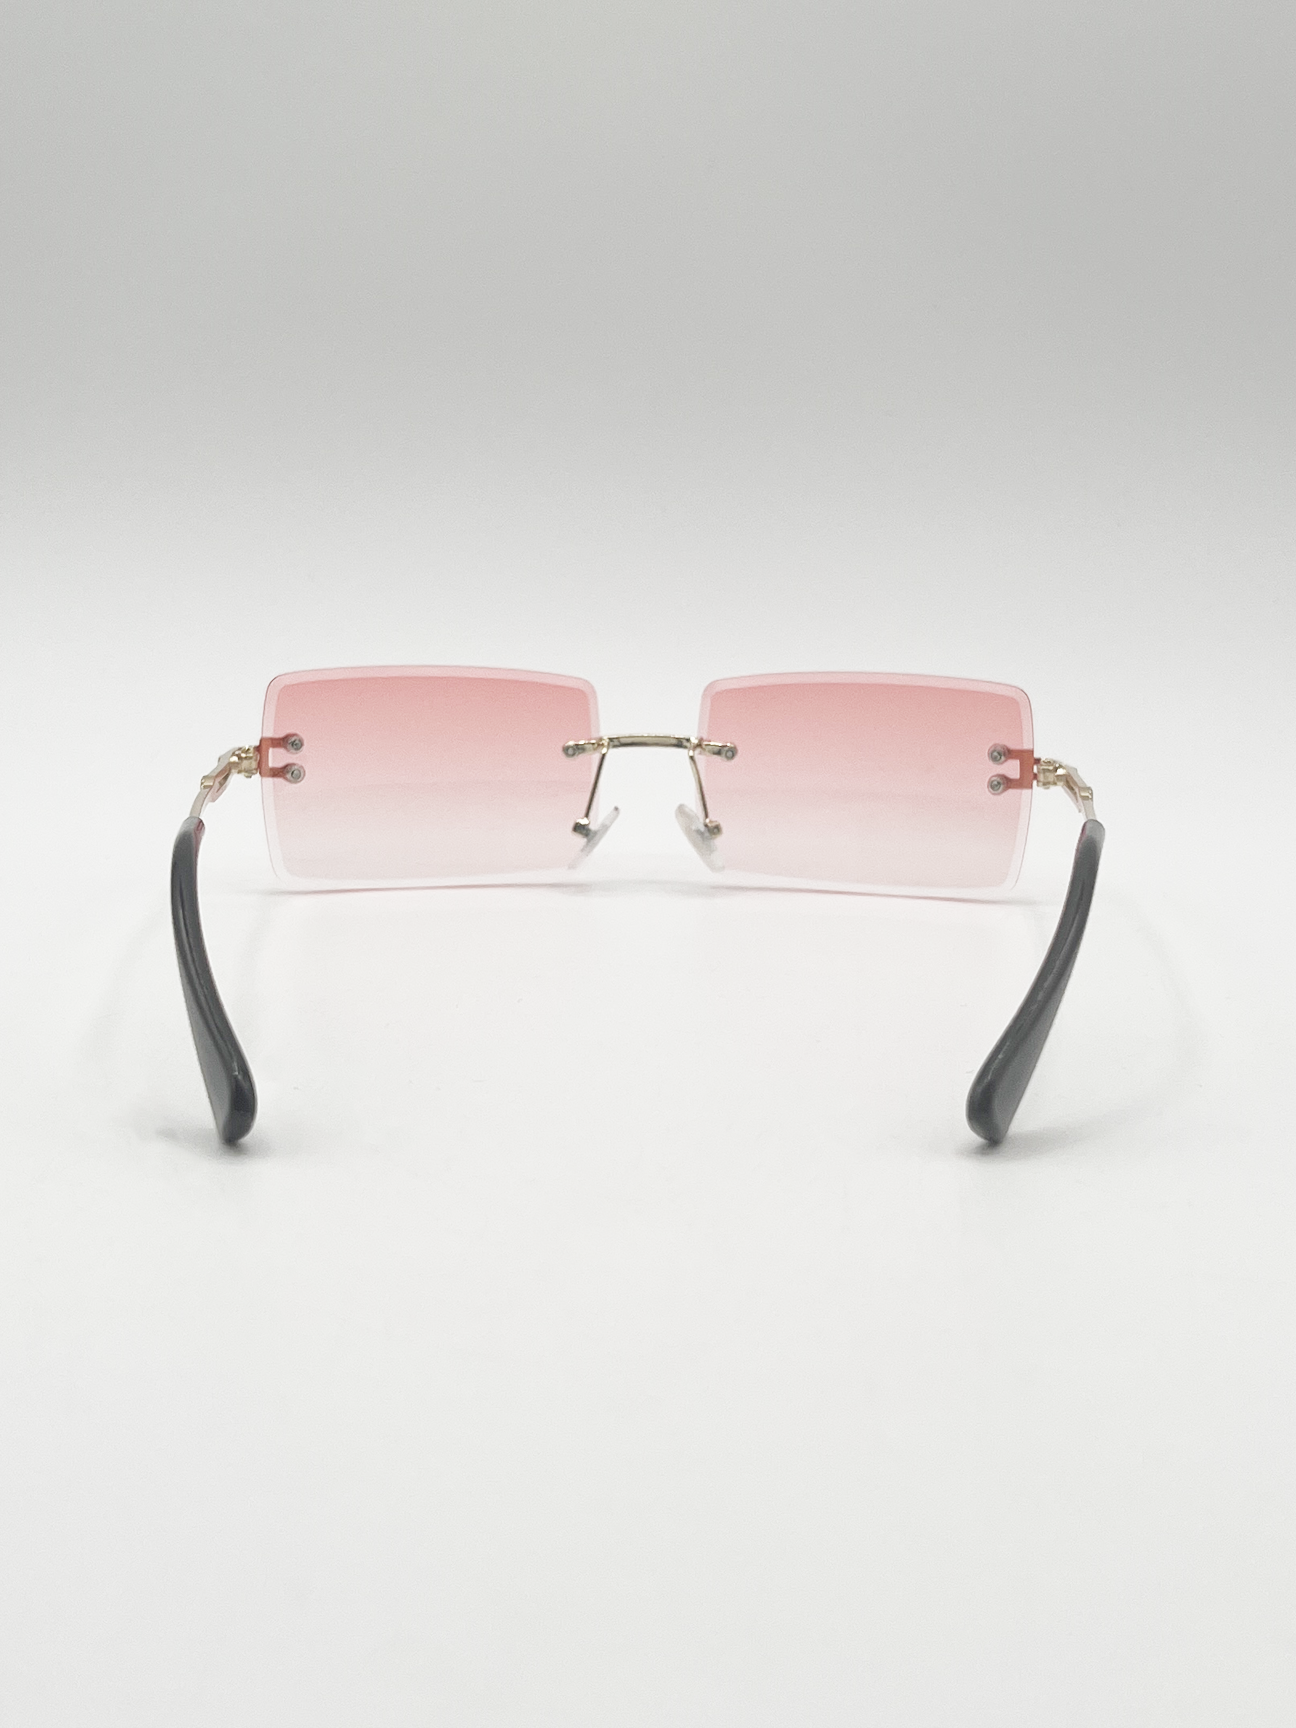 Frameless Square Sunglasses in Pink